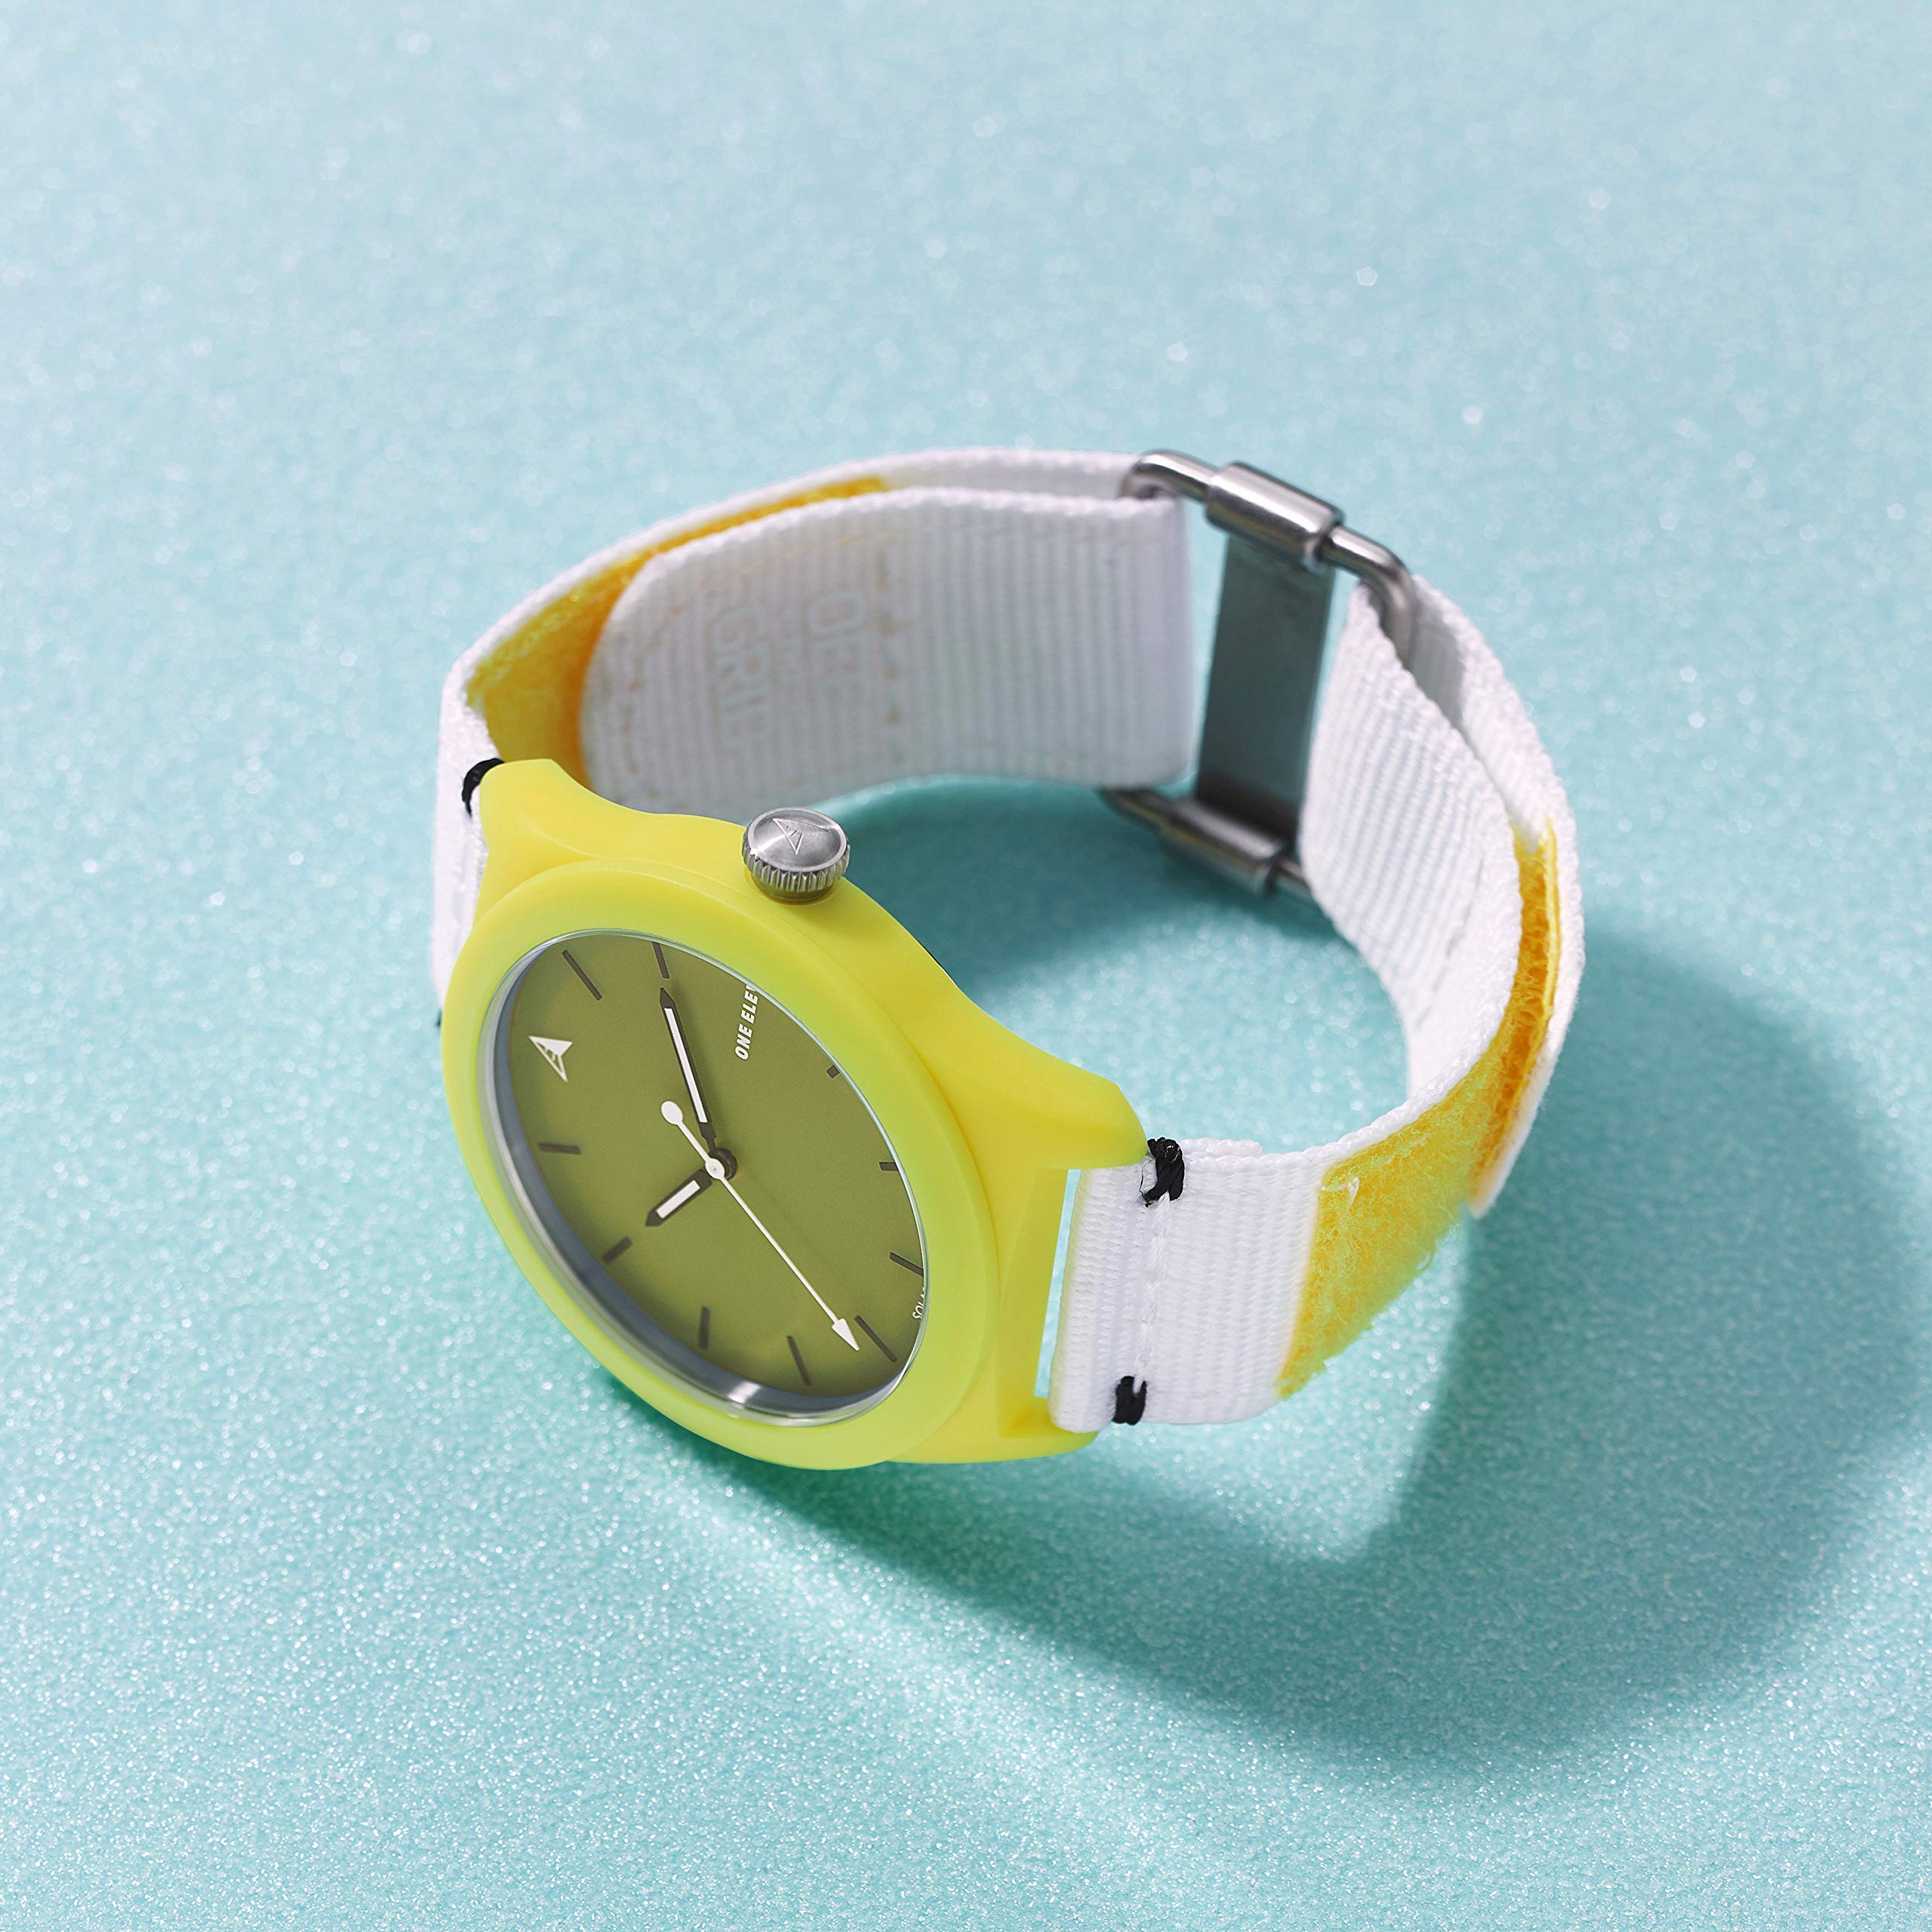 One Eleven (111) All-Gender SWII Sustainably Crafted Bio-Plastic and Recycled Nylon Casual Solar Watch